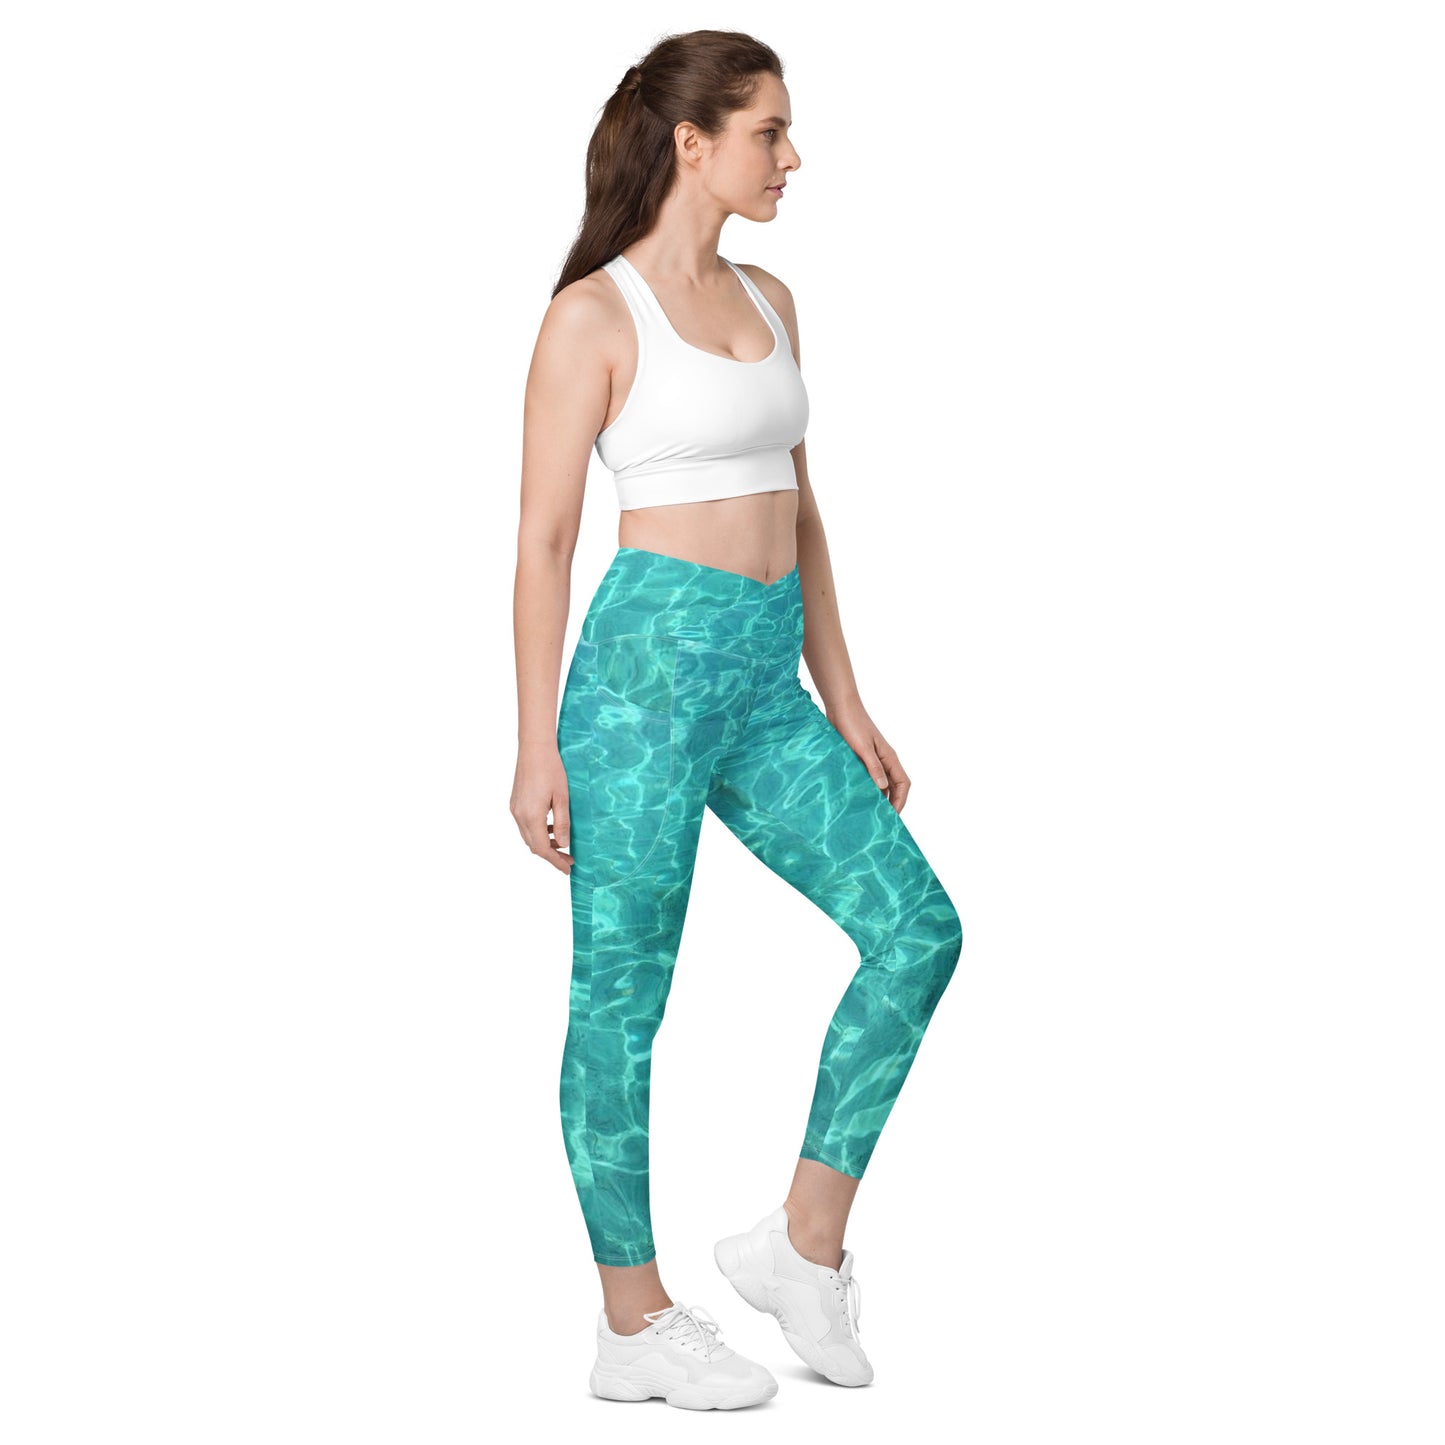 Caribbean Waters - Crossover leggings with pockets - 2XS to 6XL